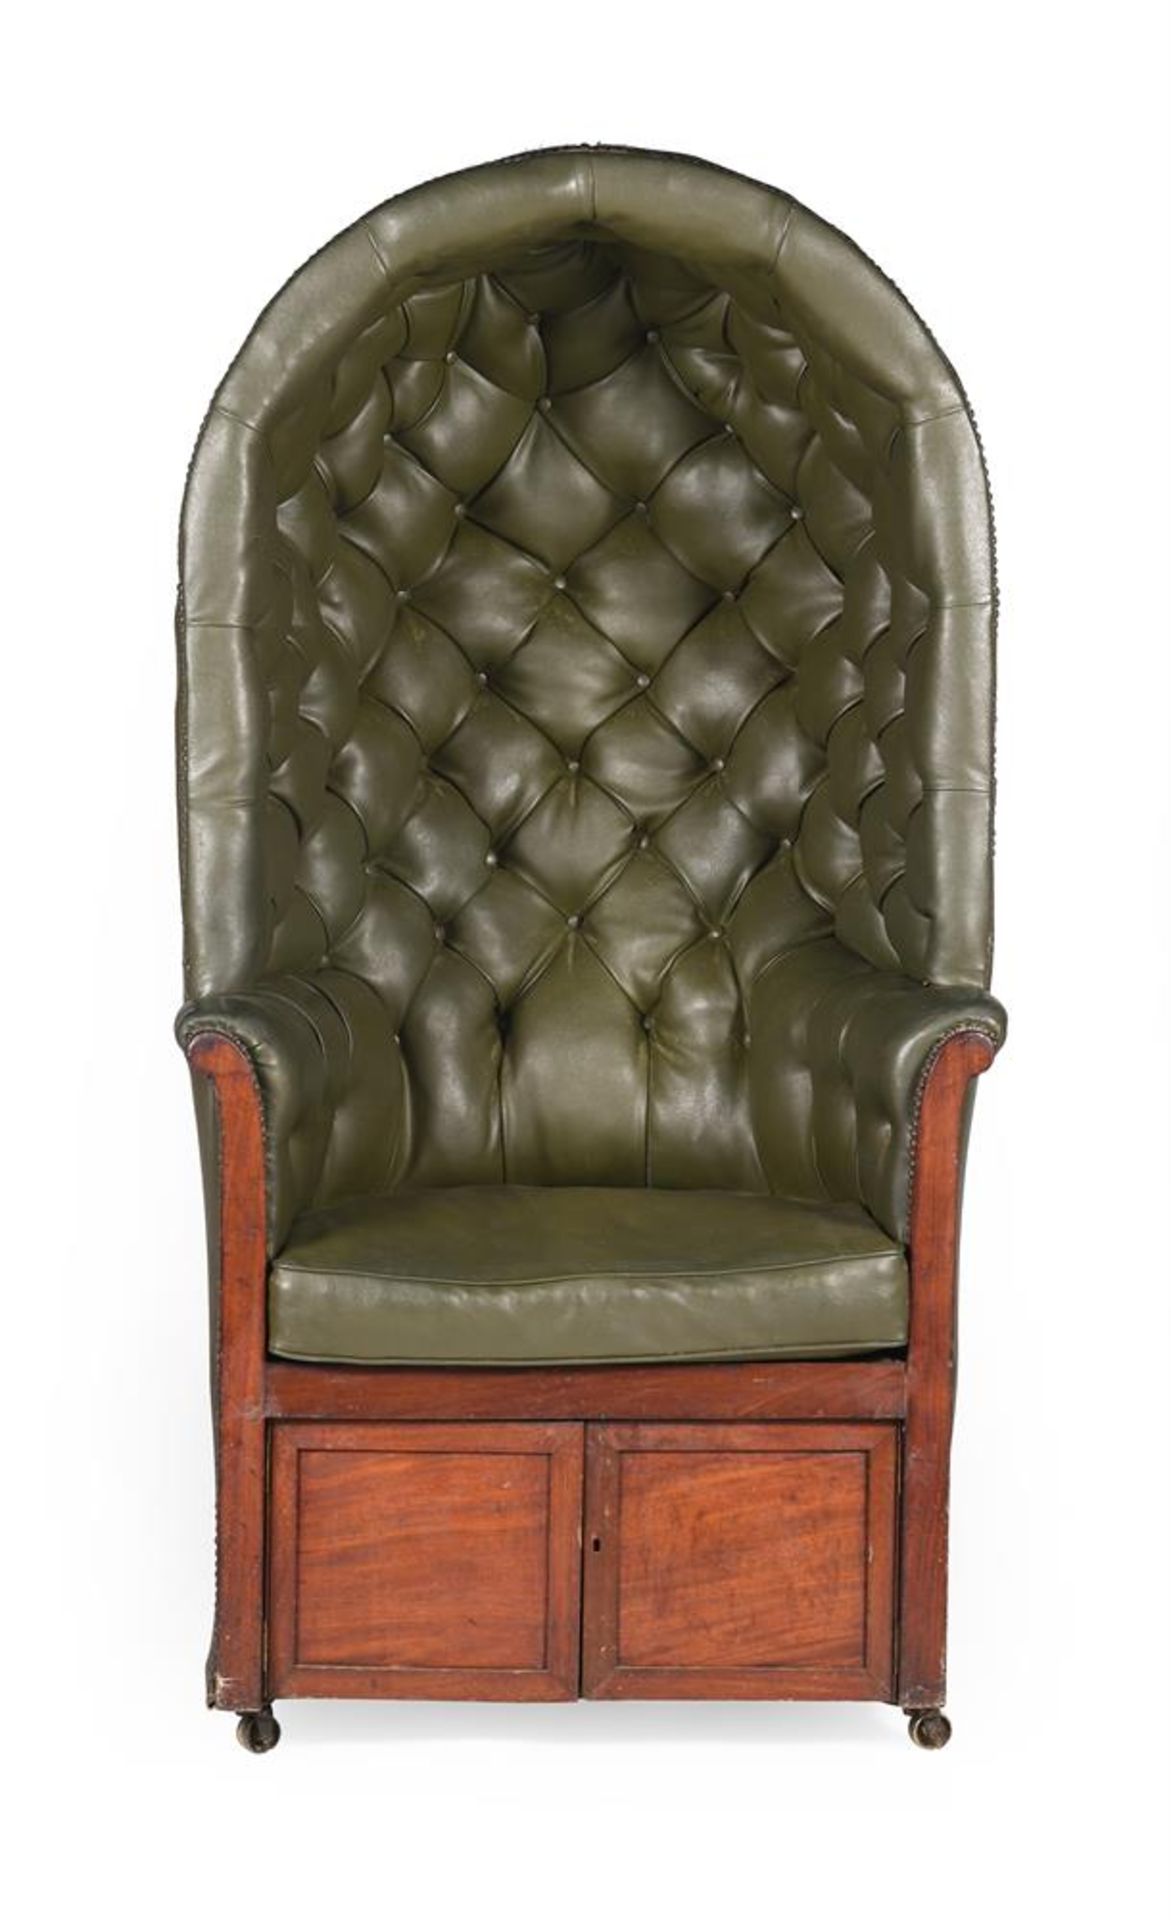 A LATE REGENCY CLOSE NAILED FAUX LEATHER UPHOLSTERED PORTER'S CHAIR, EARLY 19TH CENTURY - Image 2 of 4